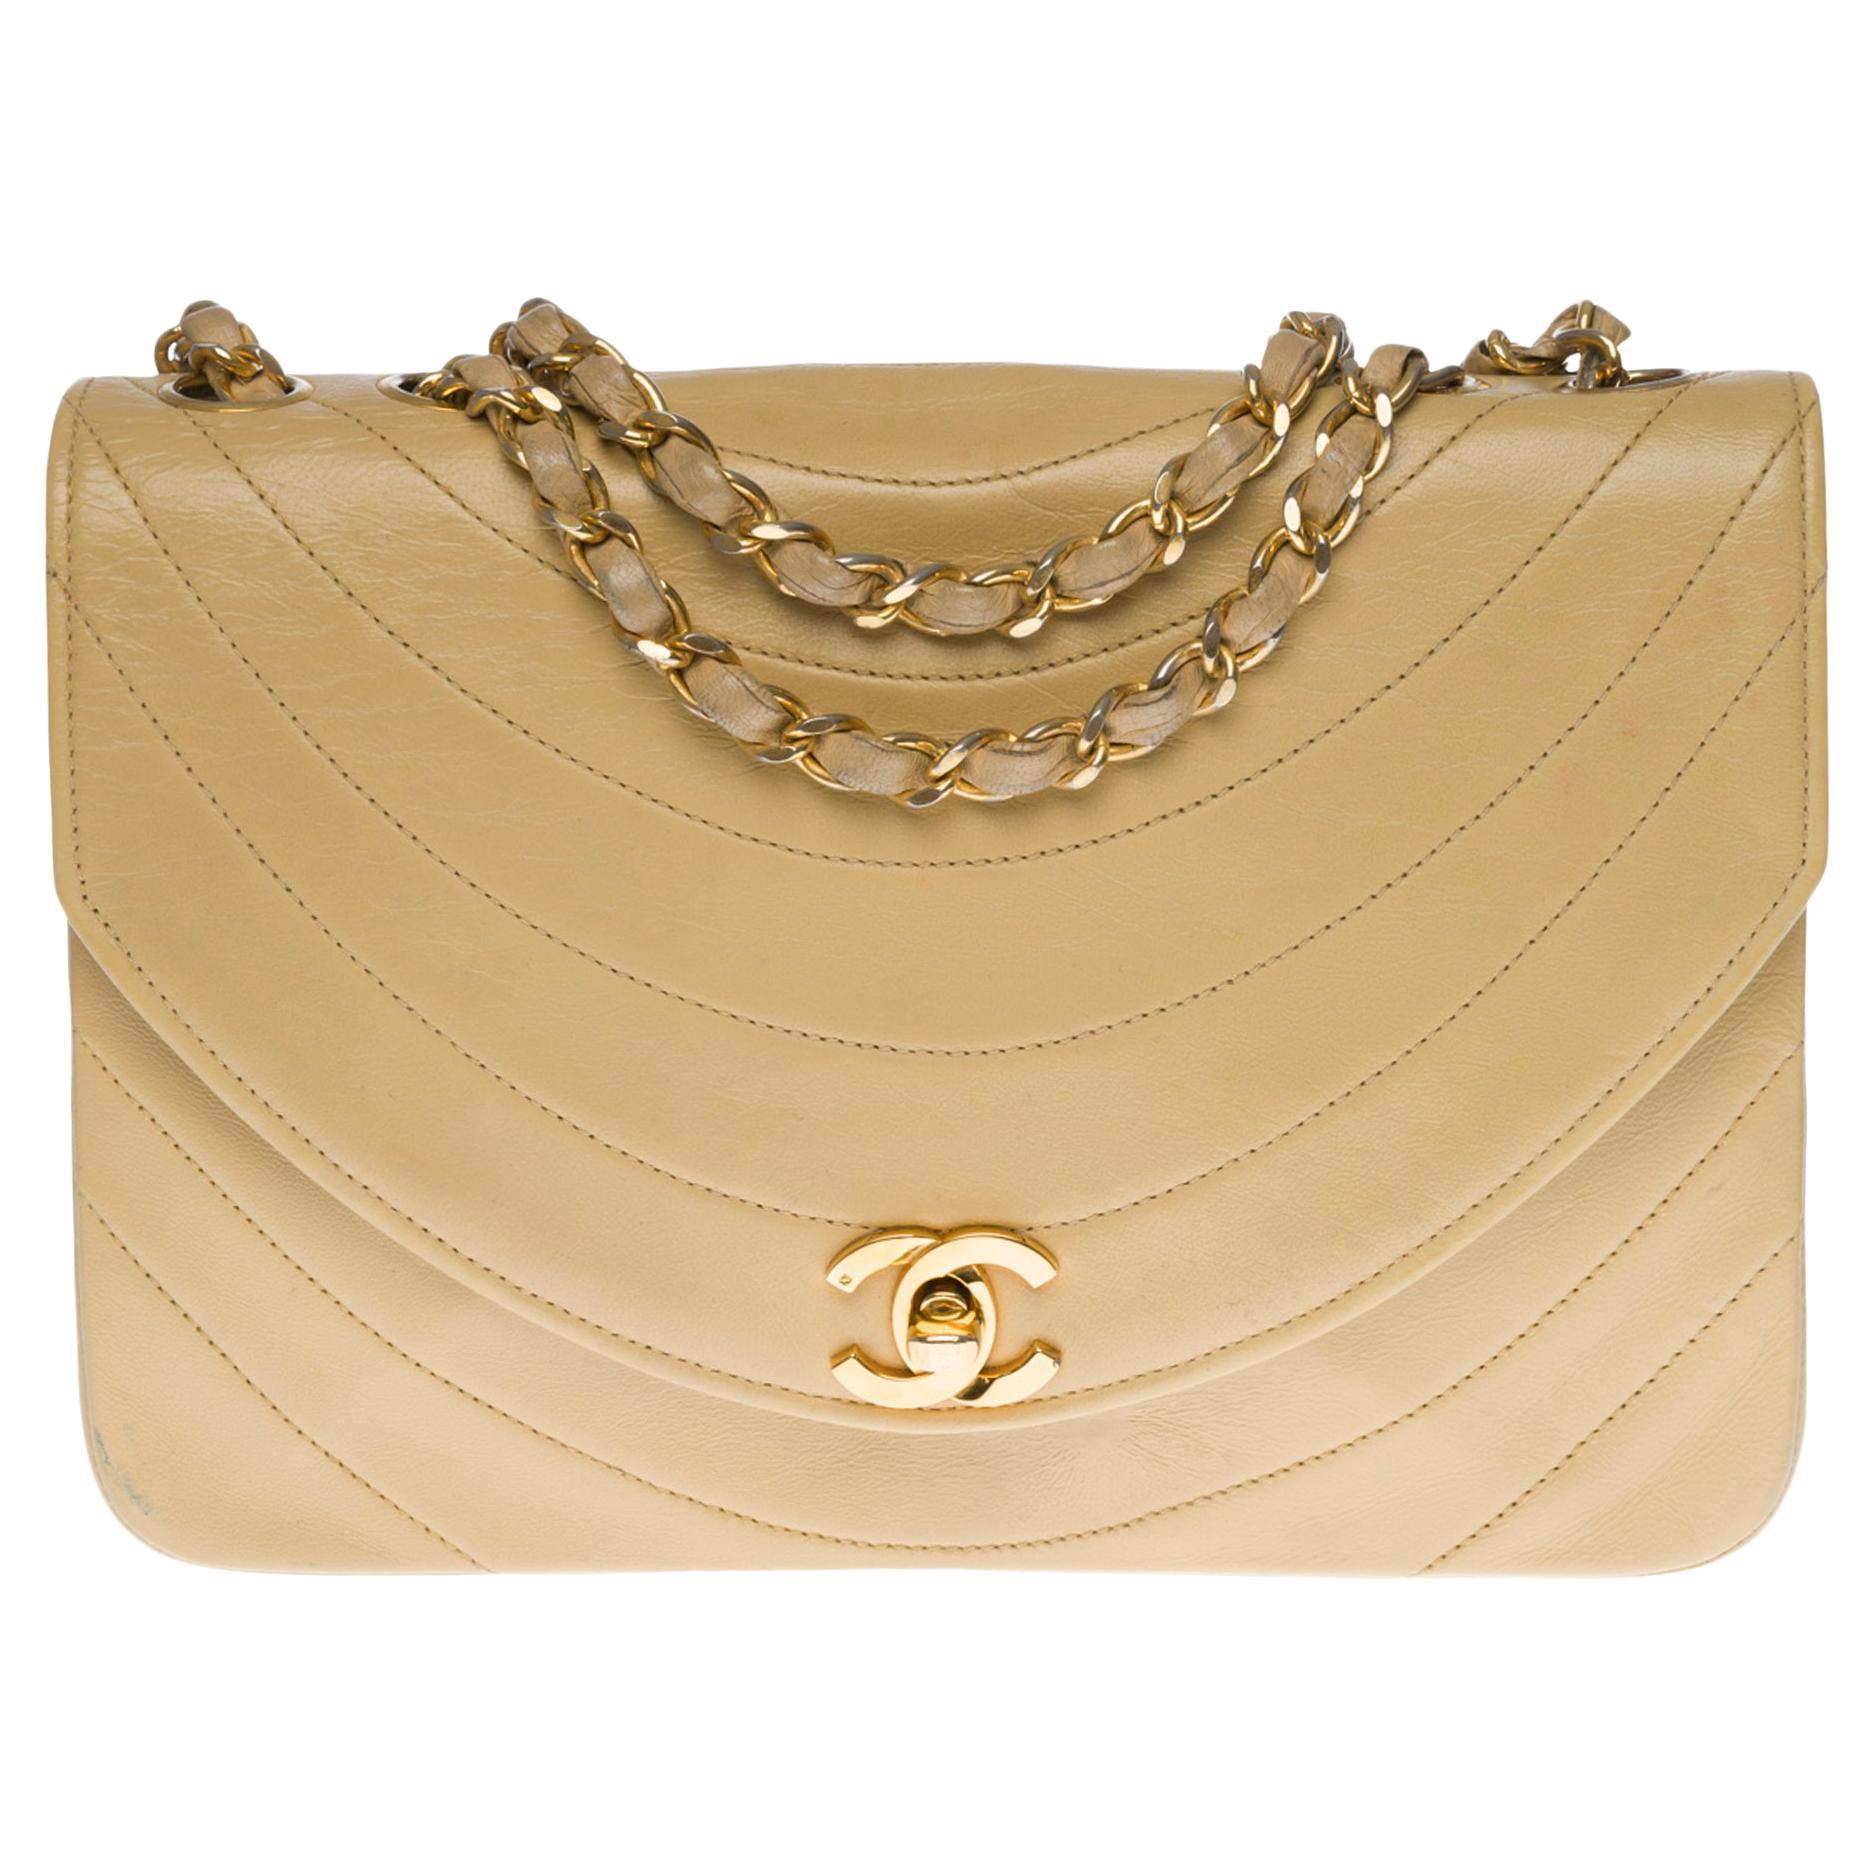 Chanel Classic shoulder bag in beige quilted lambskin and gold hardware